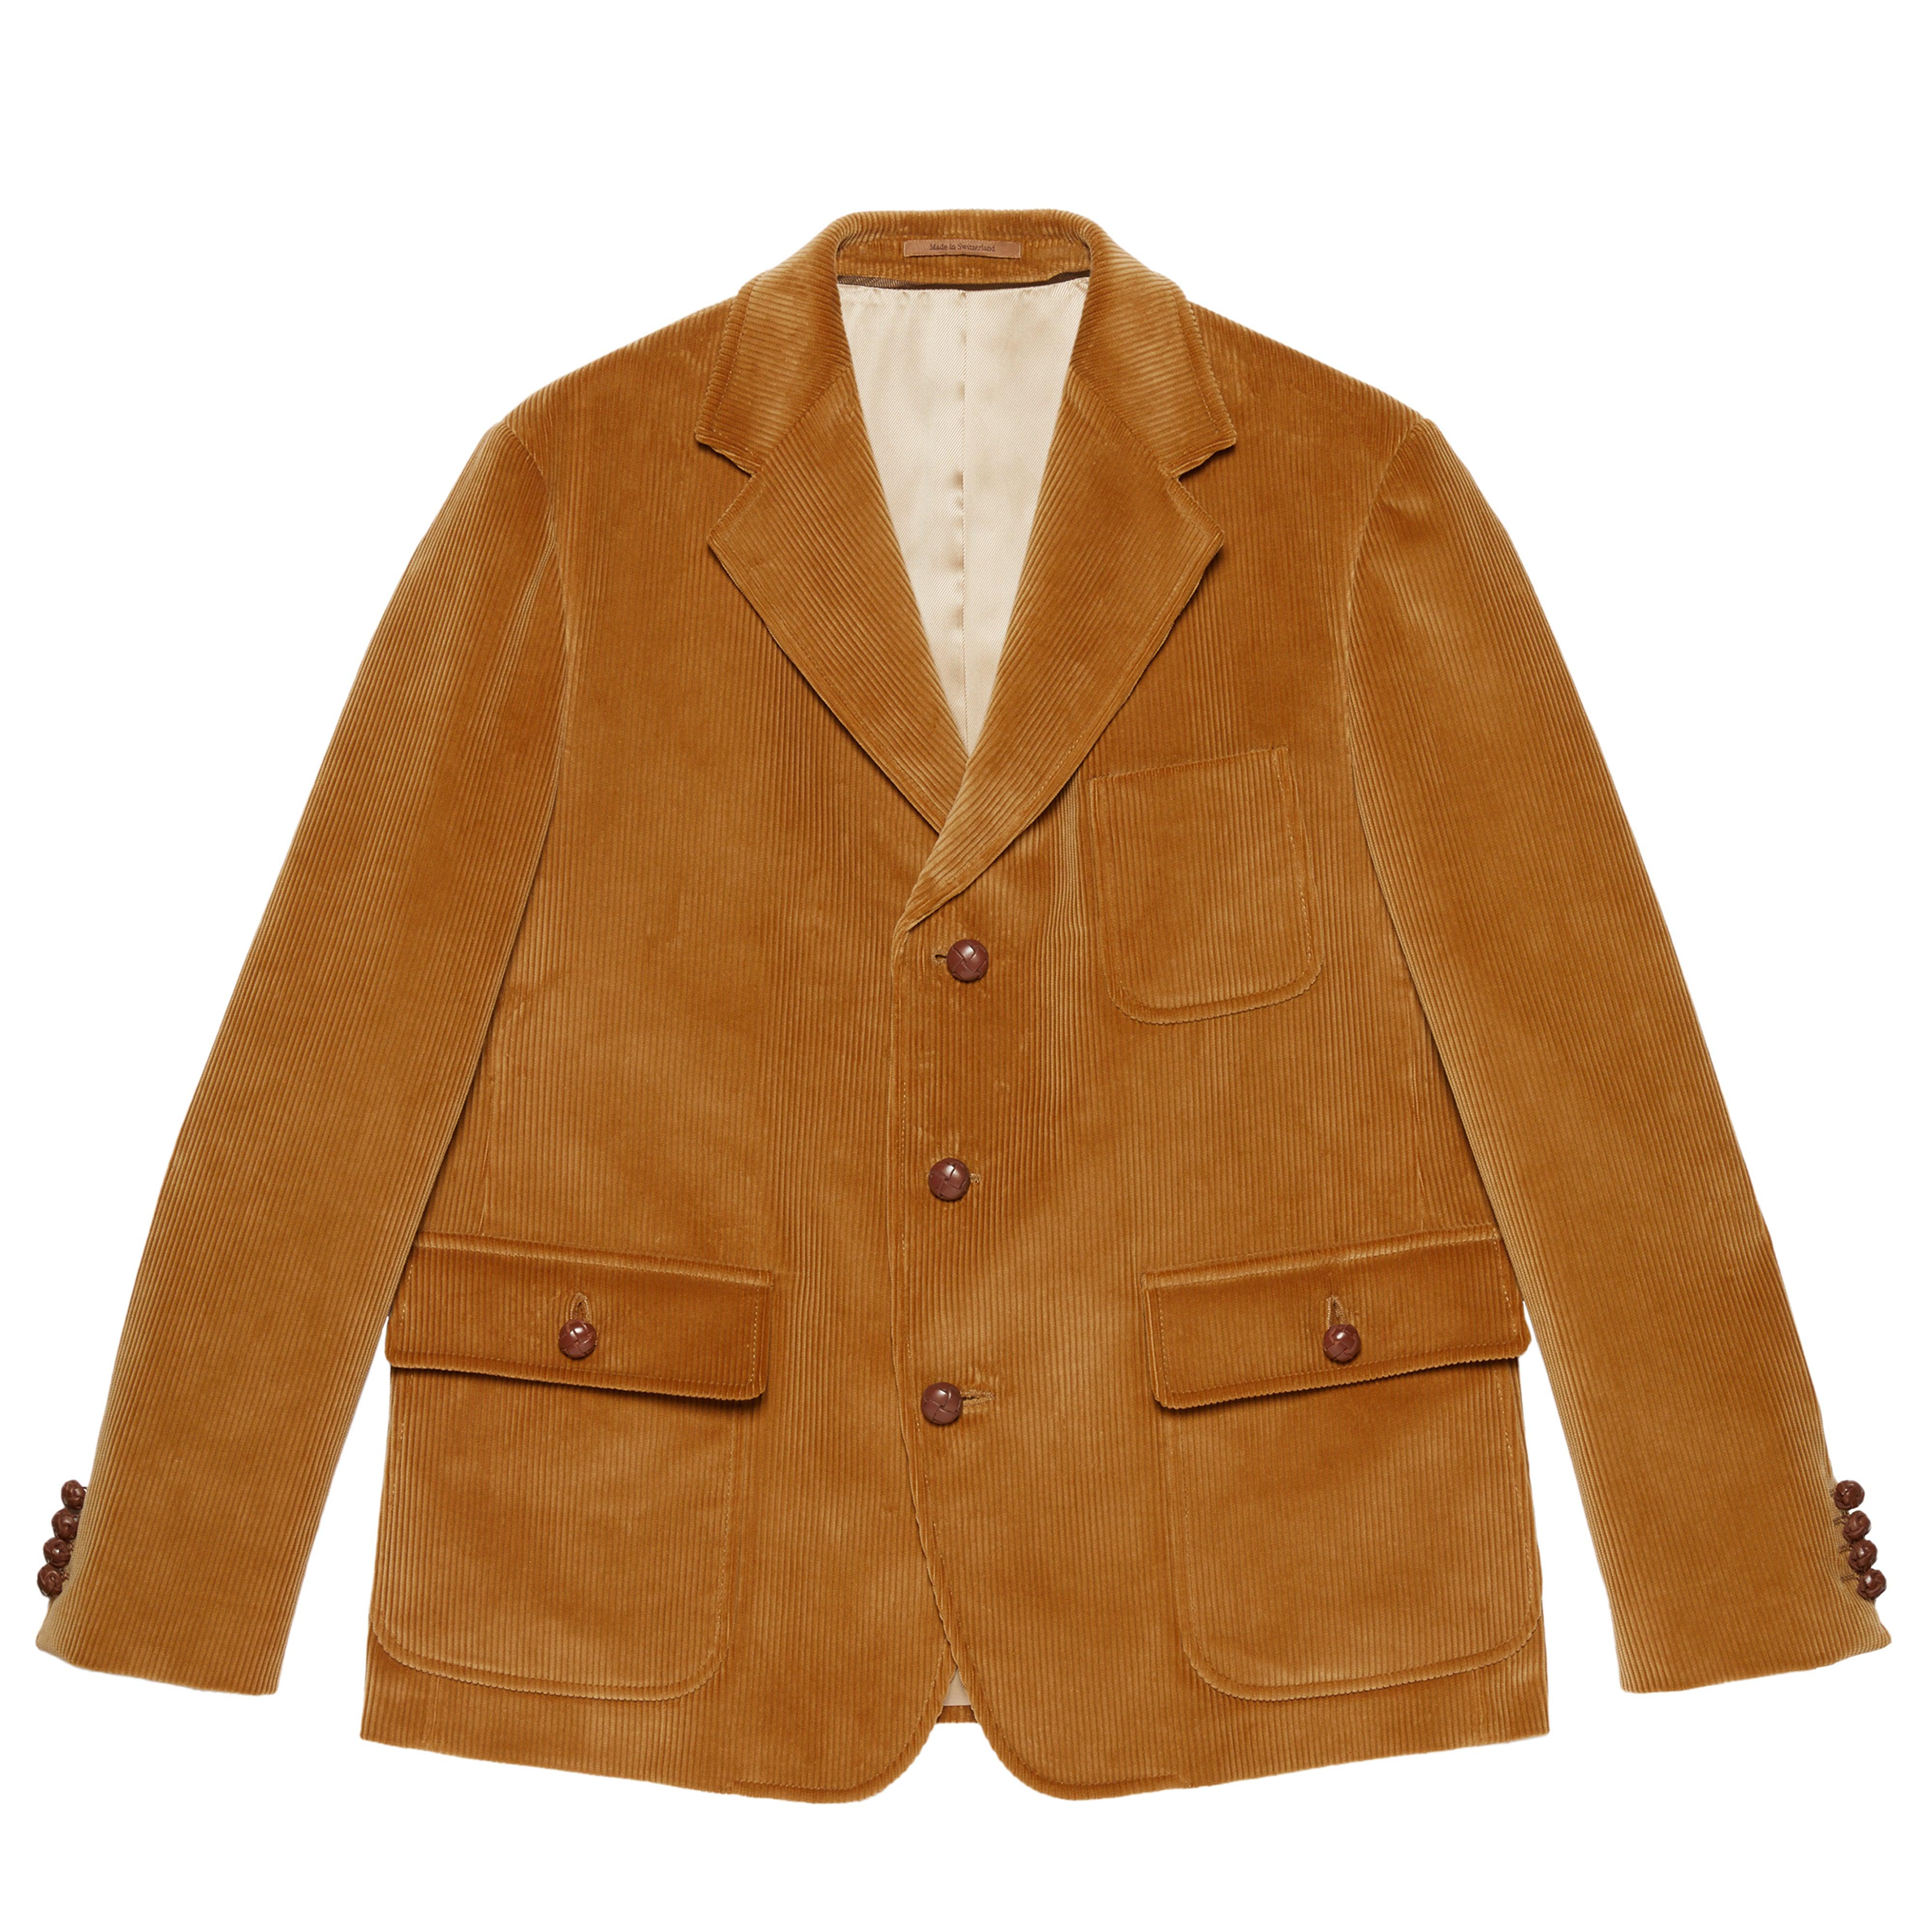 Gucci Men's DSM Exclusive Corduroy Single-Breasted Jacket (Camel) by GUCCI